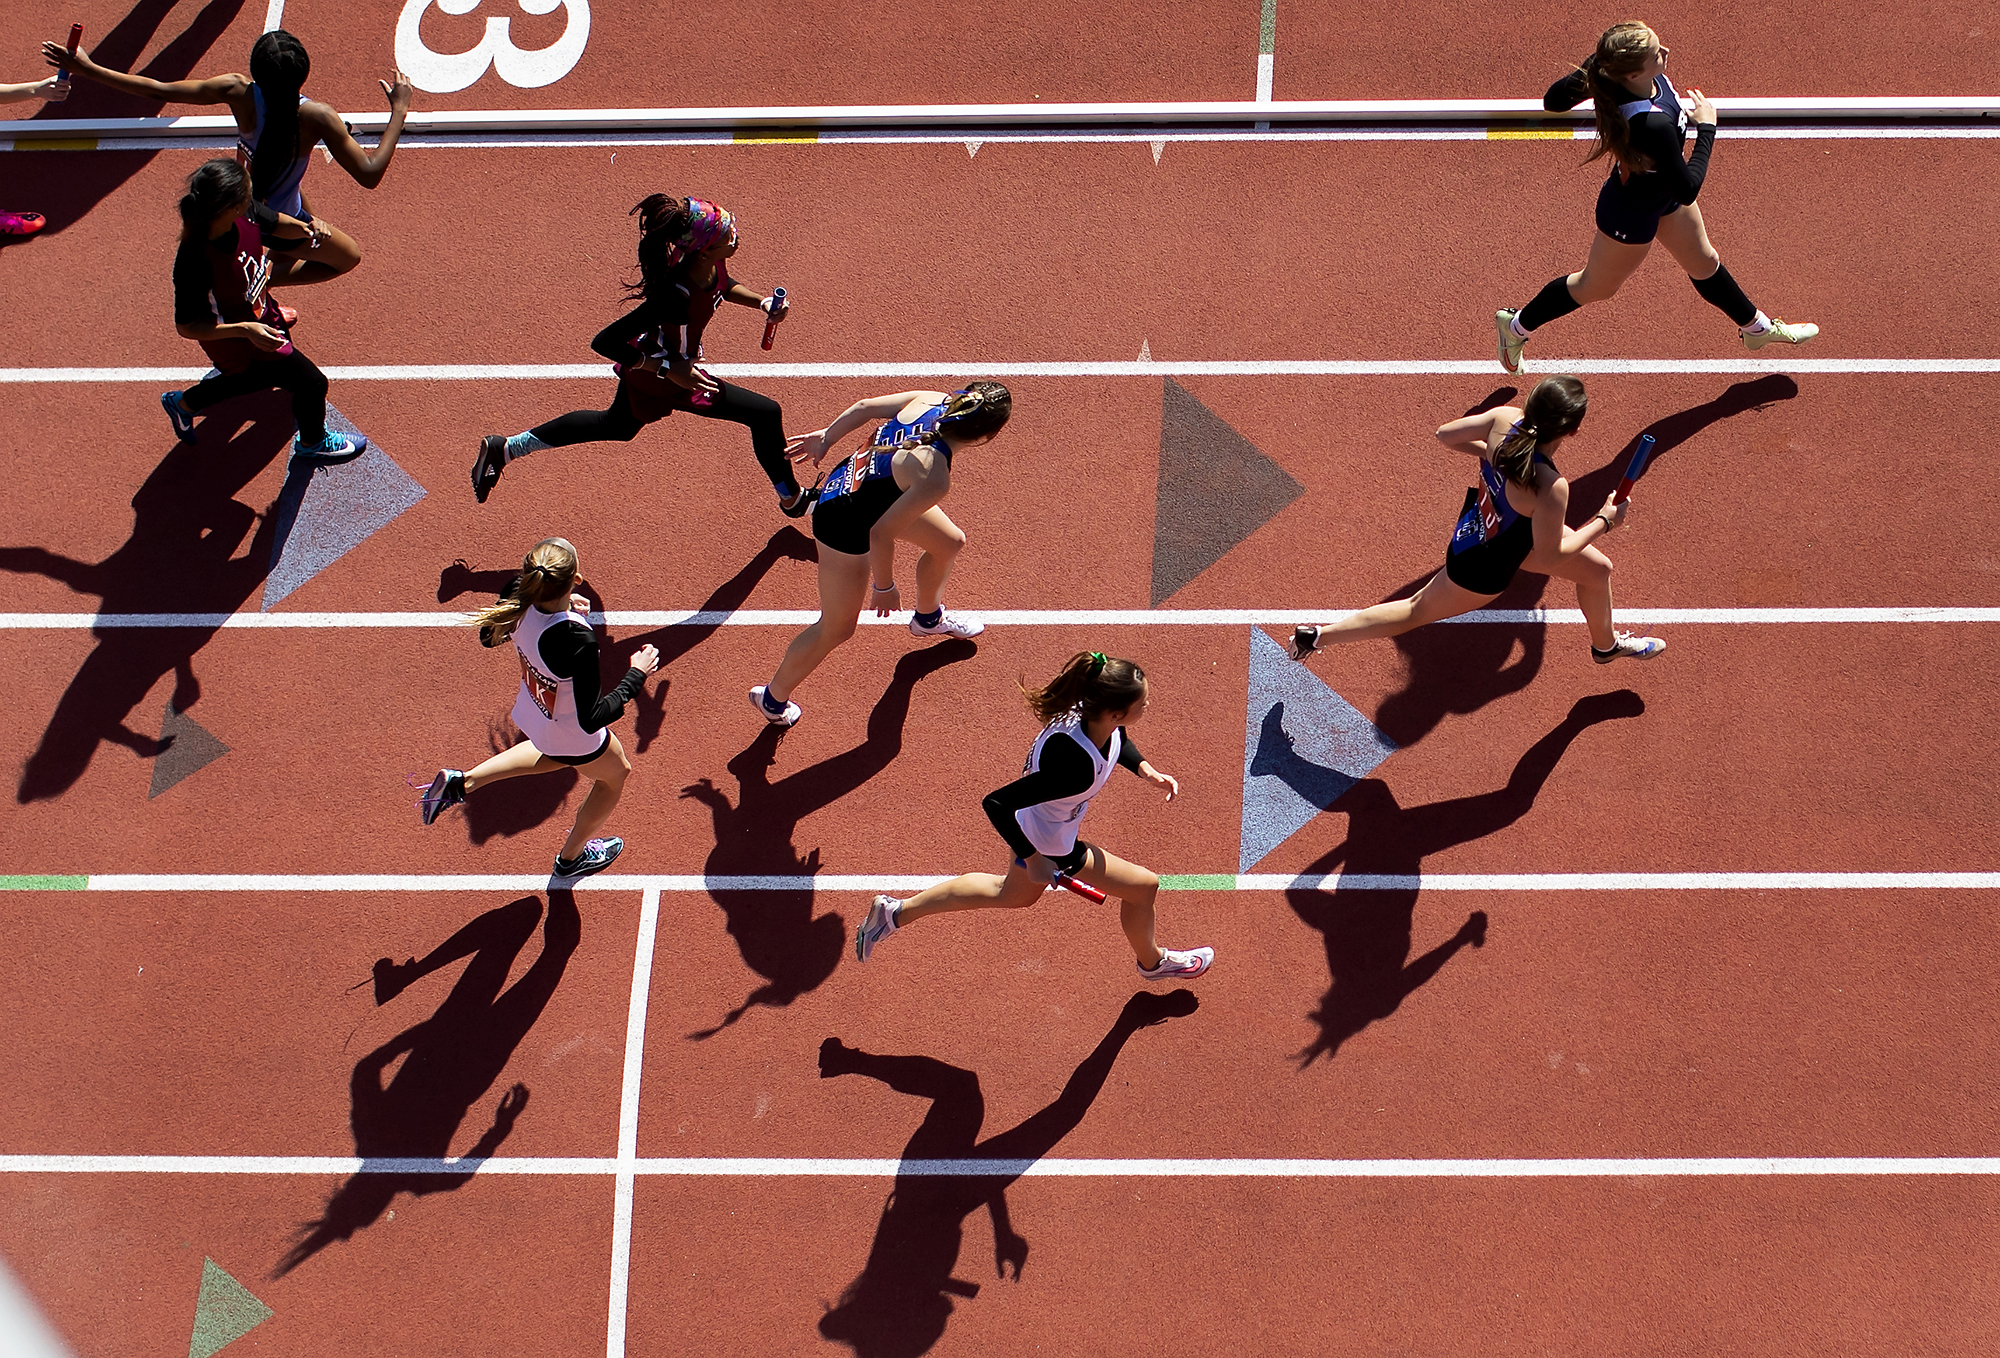 Overhead view of runners running a race on a track.